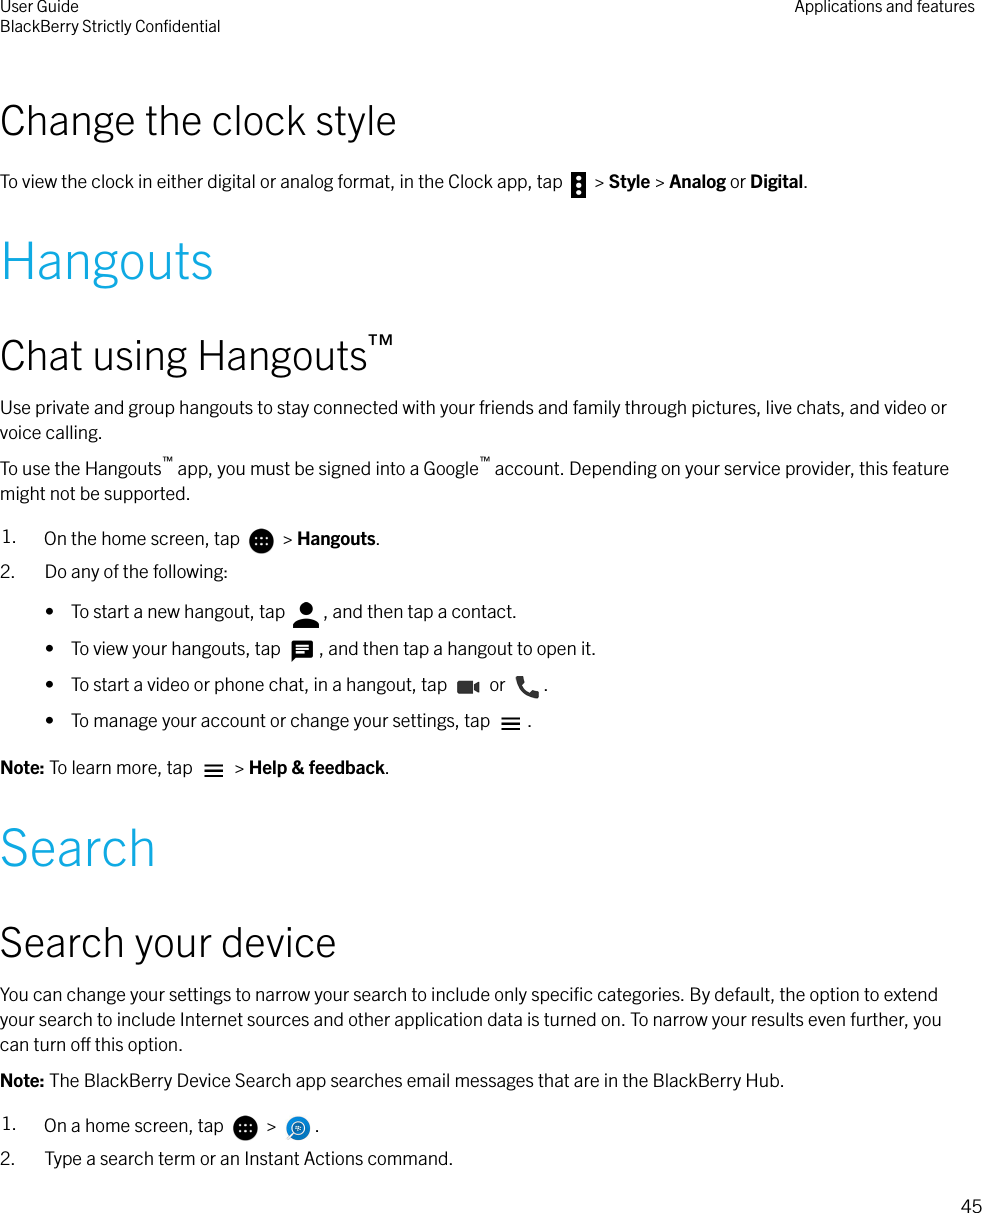 Change the clock styleTo view the clock in either digital or analog format, in the Clock app, tap   &gt; Style &gt; Analog or Digital.HangoutsChat using Hangouts™Use private and group hangouts to stay connected with your friends and family through pictures, live chats, and video orvoice calling.To use the Hangouts™ app, you must be signed into a Google™ account. Depending on your service provider, this featuremight not be supported.1. On the home screen, tap   &gt; Hangouts.2. Do any of the following:•  To start a new hangout, tap  , and then tap a contact.•  To view your hangouts, tap  , and then tap a hangout to open it.•  To start a video or phone chat, in a hangout, tap   or  .•  To manage your account or change your settings, tap  .Note: To learn more, tap   &gt; Help &amp; feedback.SearchSearch your deviceYou can change your settings to narrow your search to include only speciﬁc categories. By default, the option to extendyour search to include Internet sources and other application data is turned on. To narrow your results even further, youcan turn o this option.Note: The BlackBerry Device Search app searches email messages that are in the BlackBerry Hub.1. On a home screen, tap   &gt;  .2. Type a search term or an Instant Actions command.User GuideBlackBerry Strictly ConﬁdentialApplications and features45